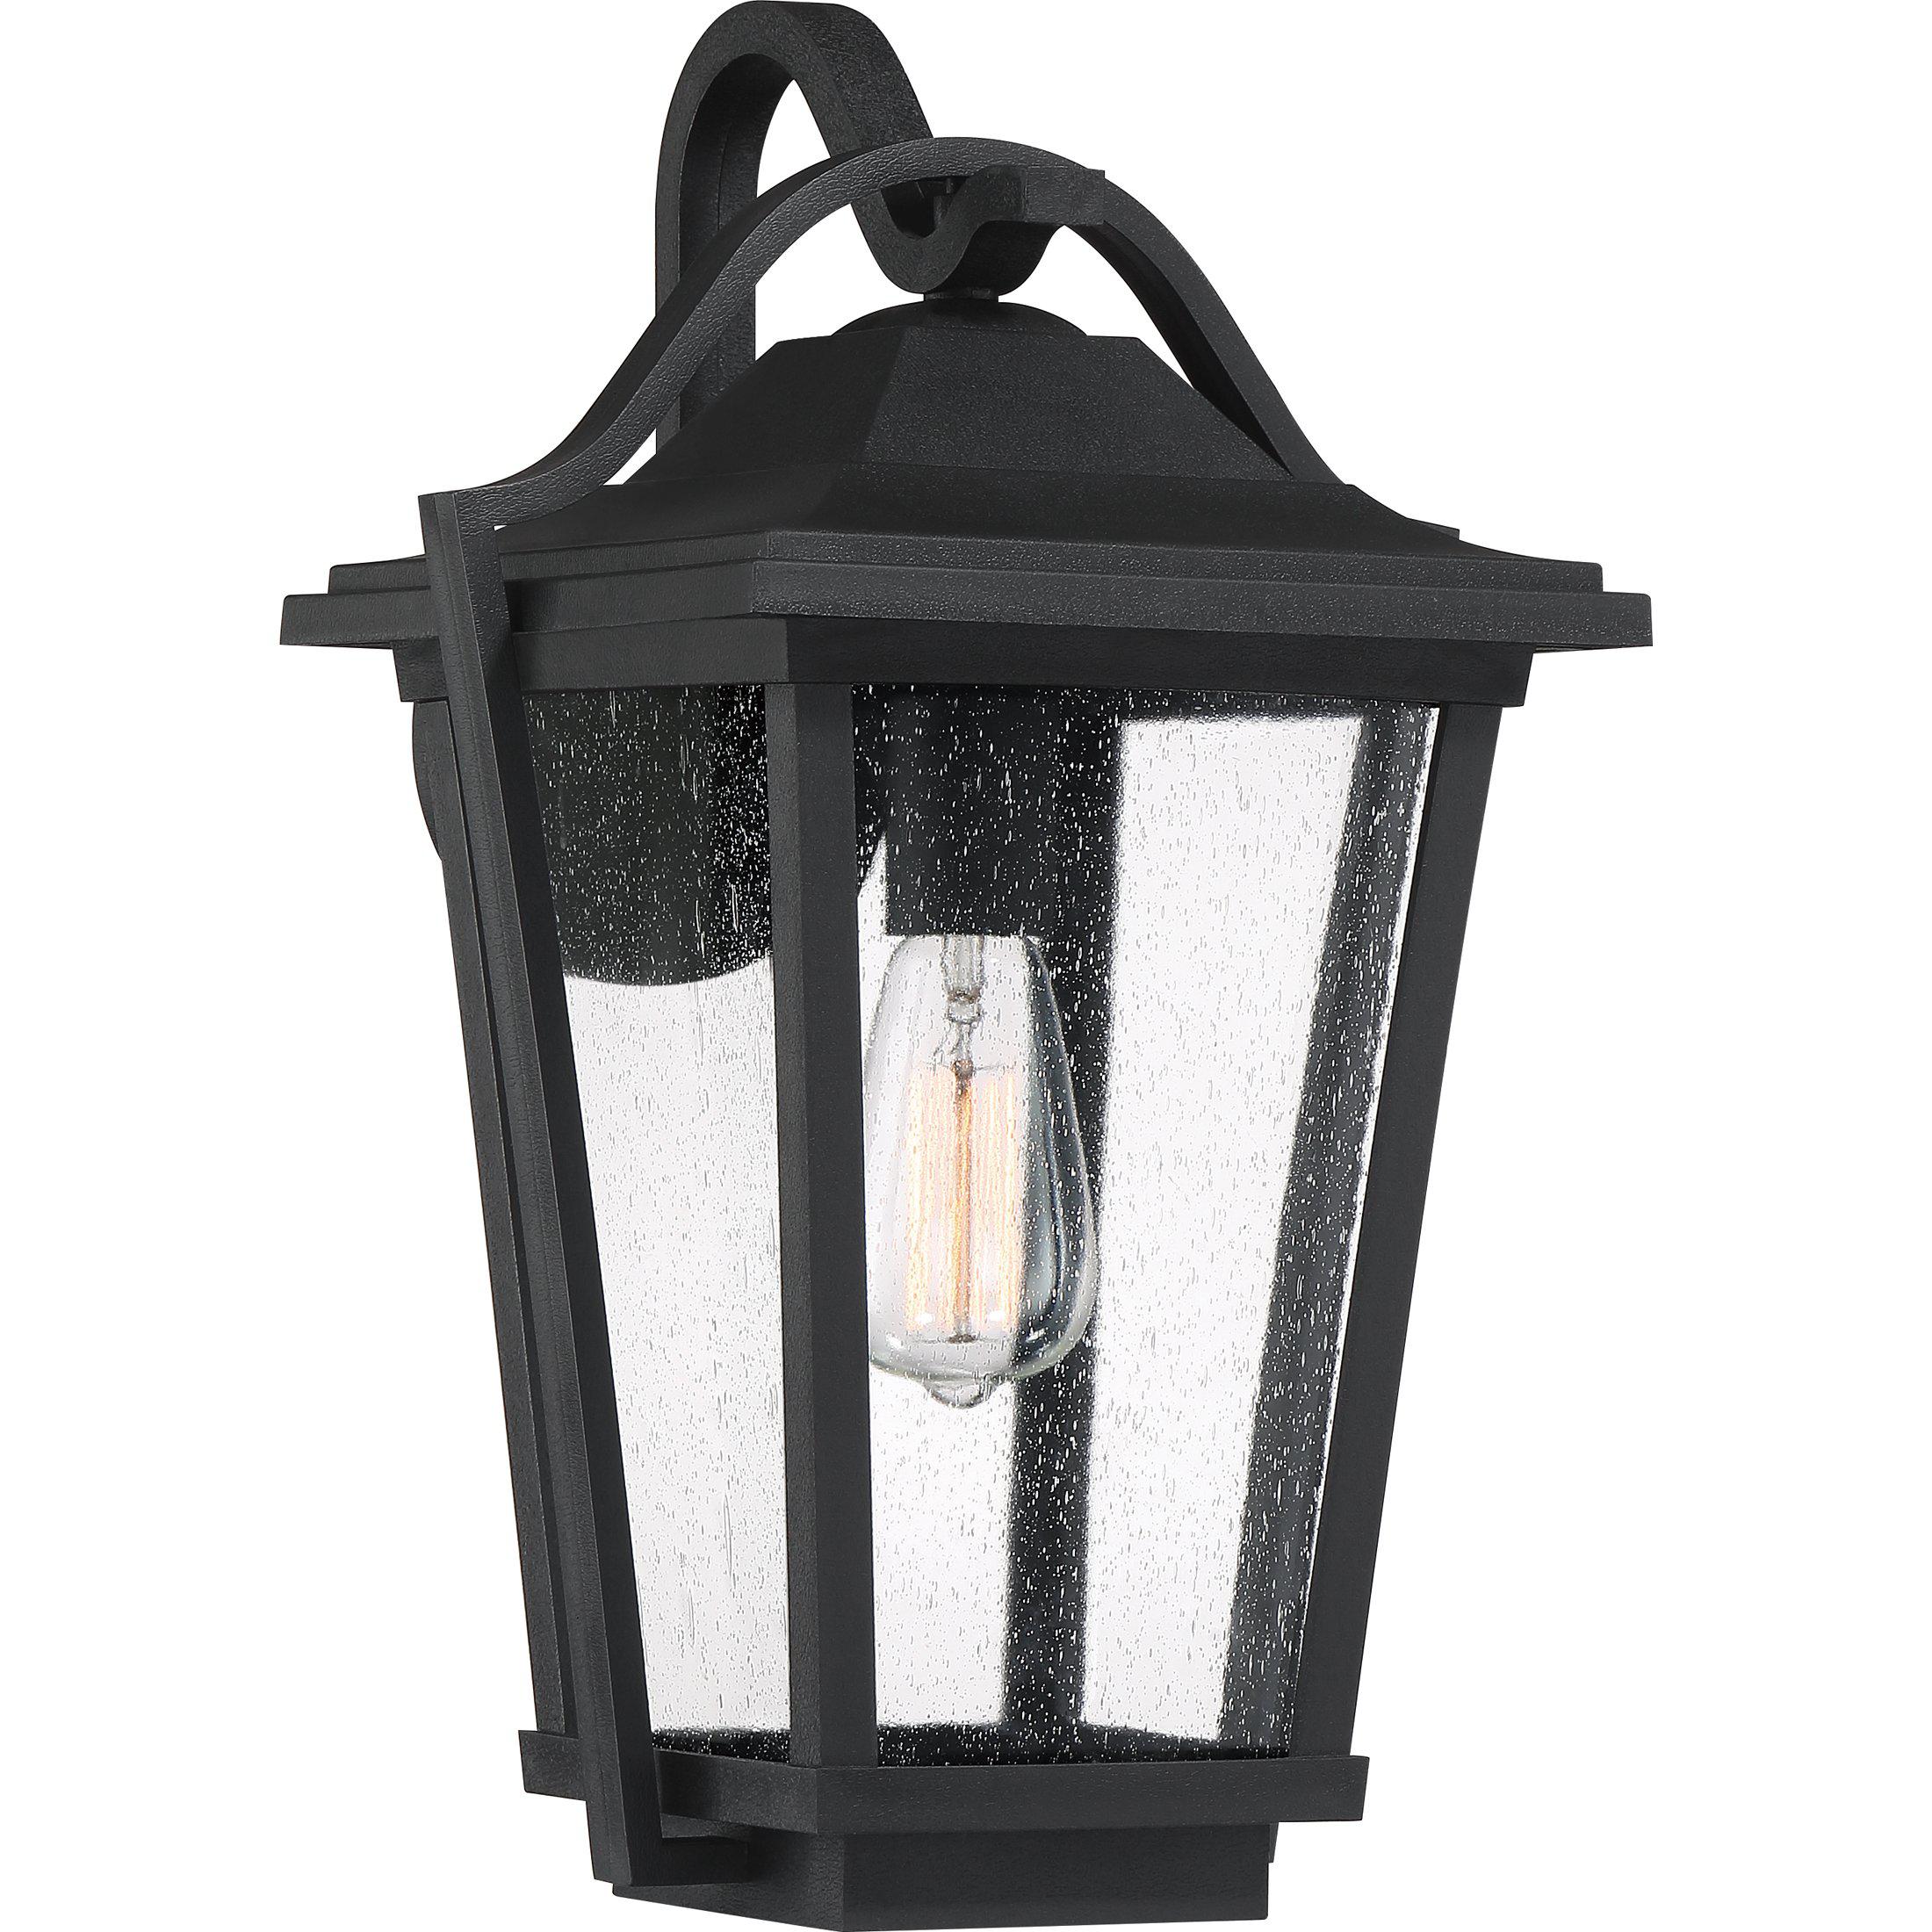 Quoizel  Darius Outdoor Lantern, Large Outdoor l Wall Quoizel Earth Black  